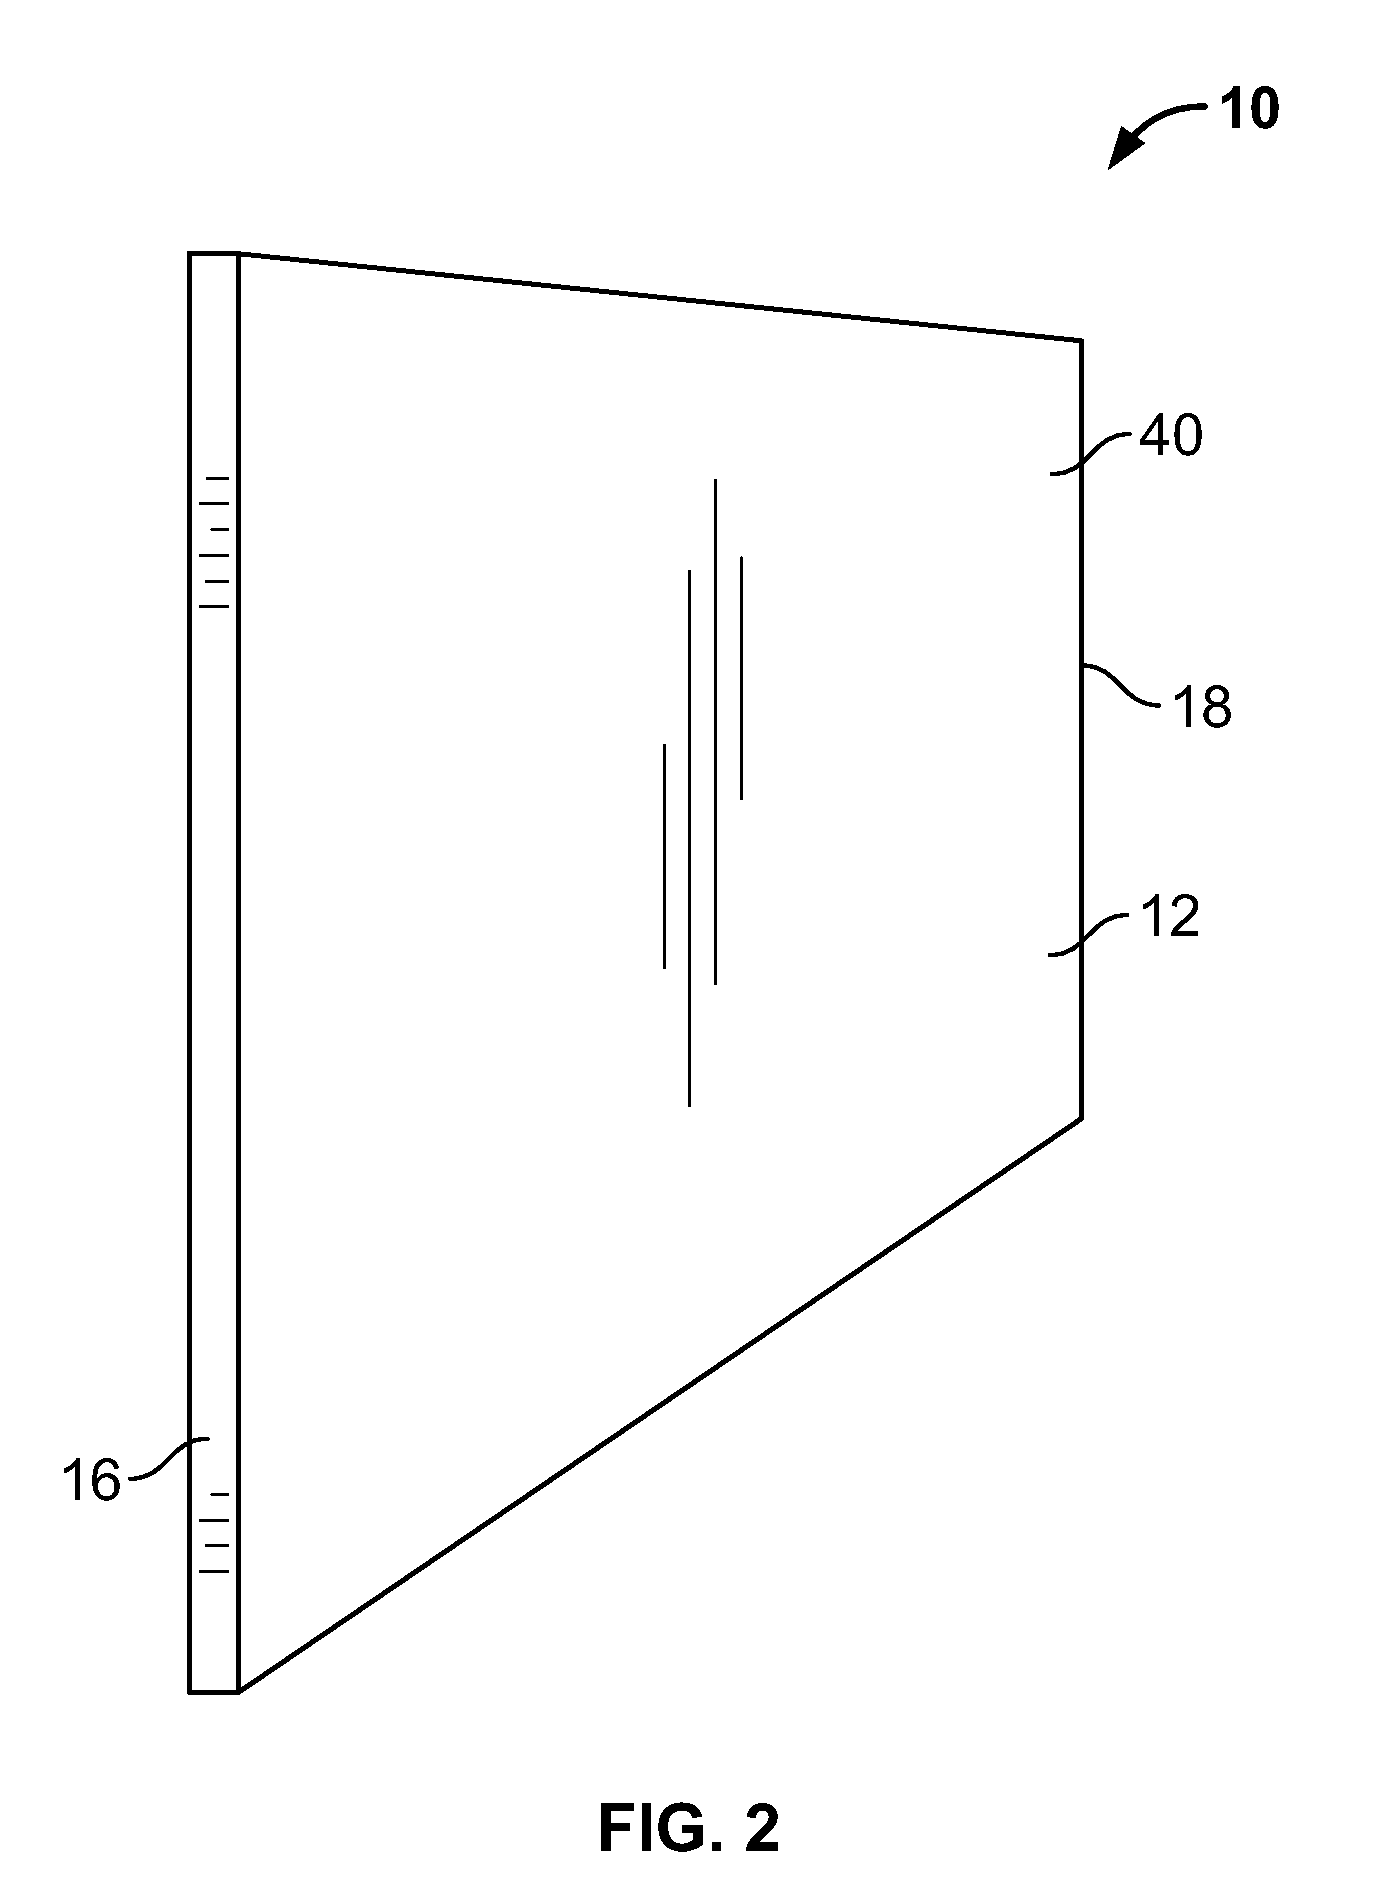 High-strength insulated building panel with internal stud members